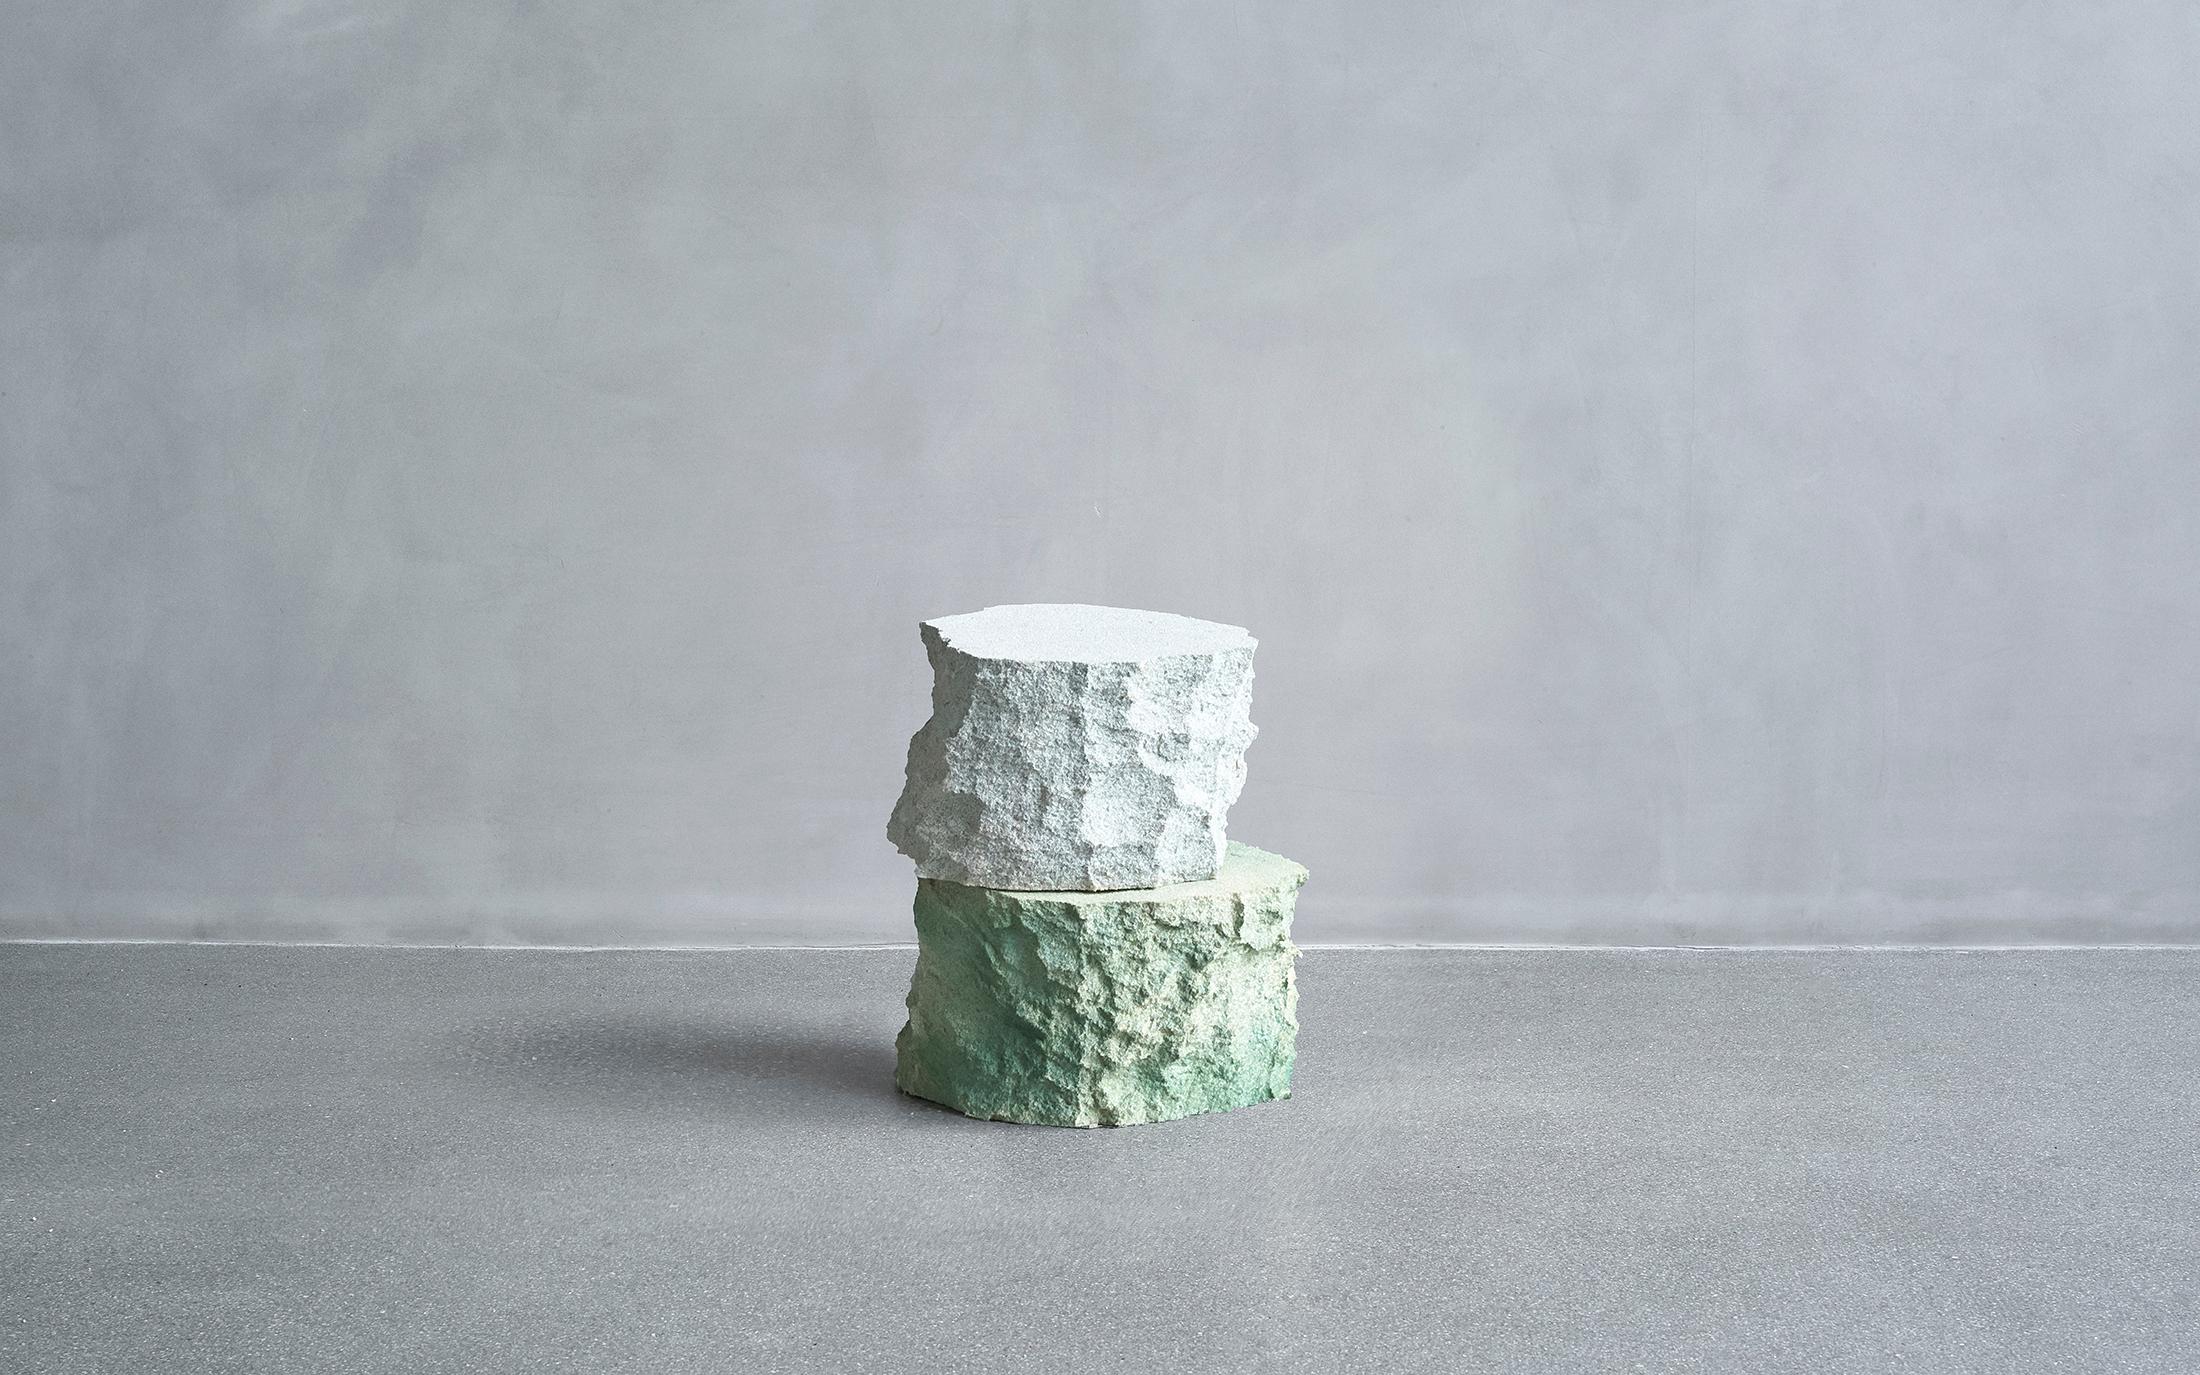 Side Table Meadow Blocks by Andredottir & Bobek
Dimensions: D 25 x H 40 cm 
Materials: Reused Foam/mattress and Jesmontite Hardner in Color White ang Green Fade.

Artificial Nature is a collaboration between the artist and design duo Josephine